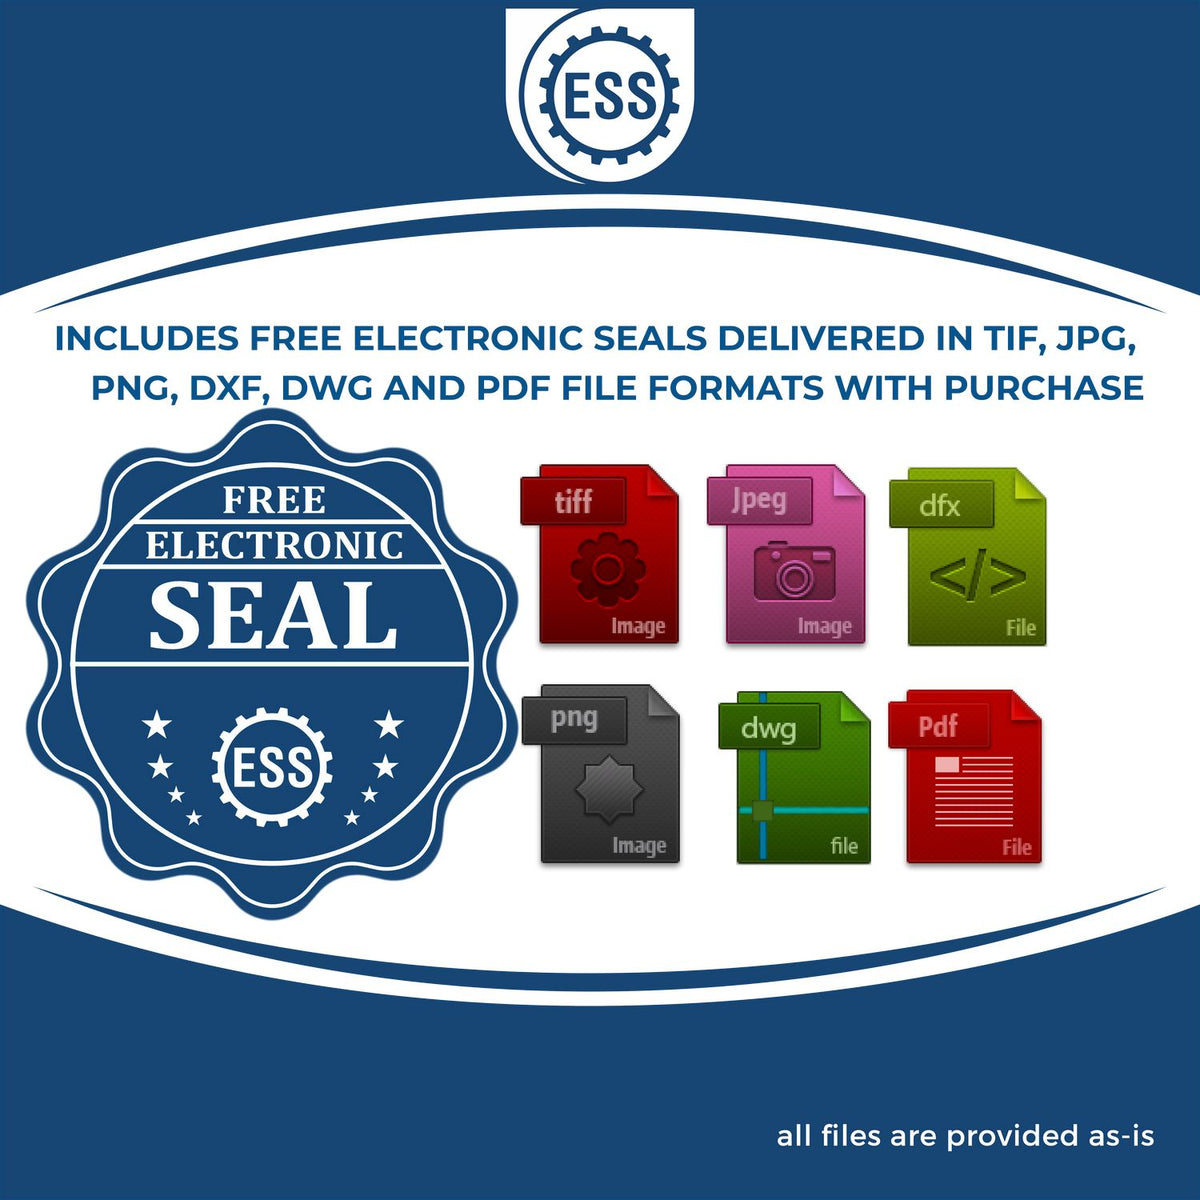 An infographic for the free electronic seal for the Heavy Duty Cast Iron New York Architect Embosser illustrating the different file type icons such as DXF, DWG, TIF, JPG and PNG.